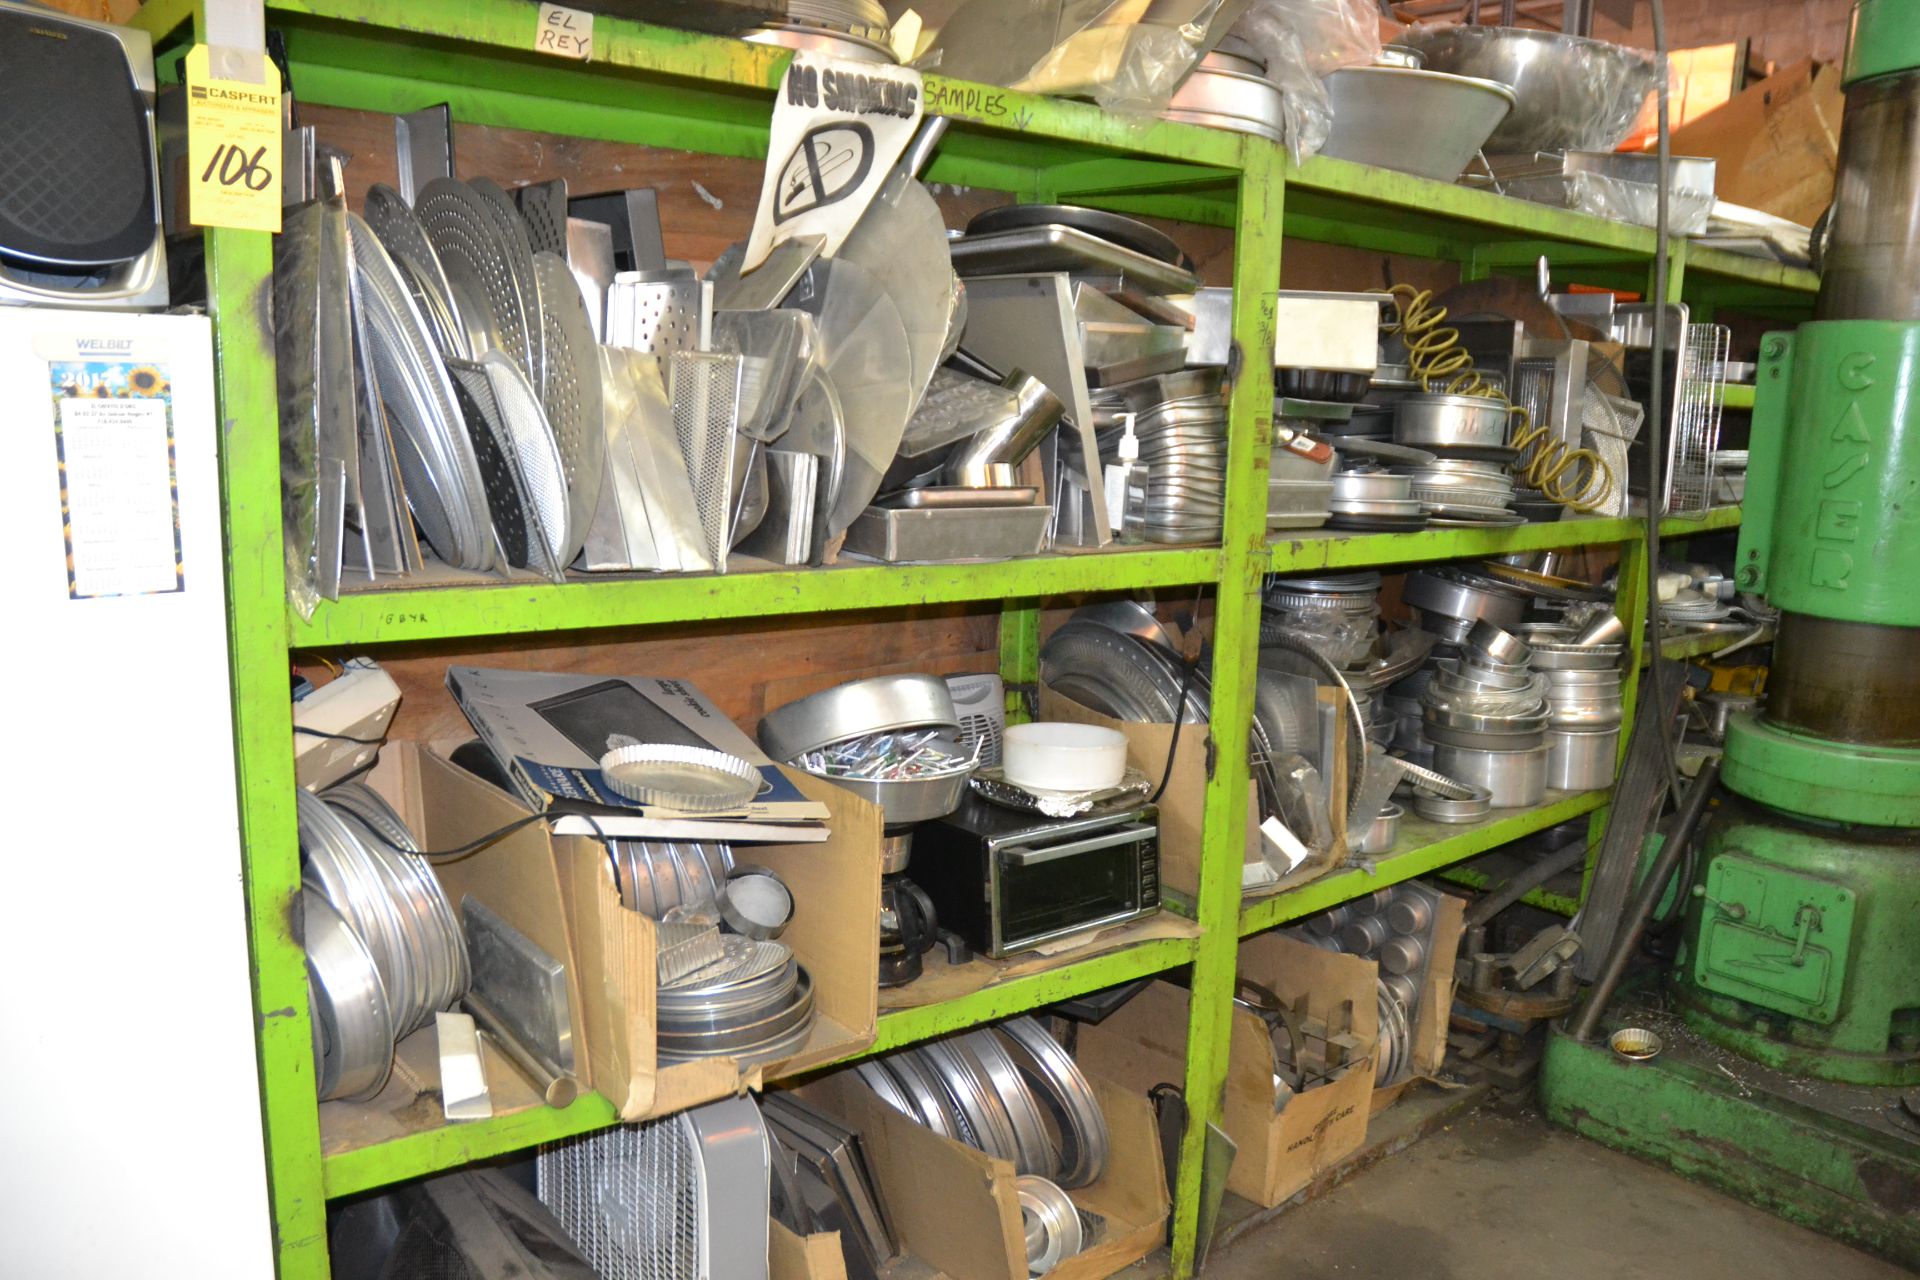 Sections of Green Steel Shelving with Contents